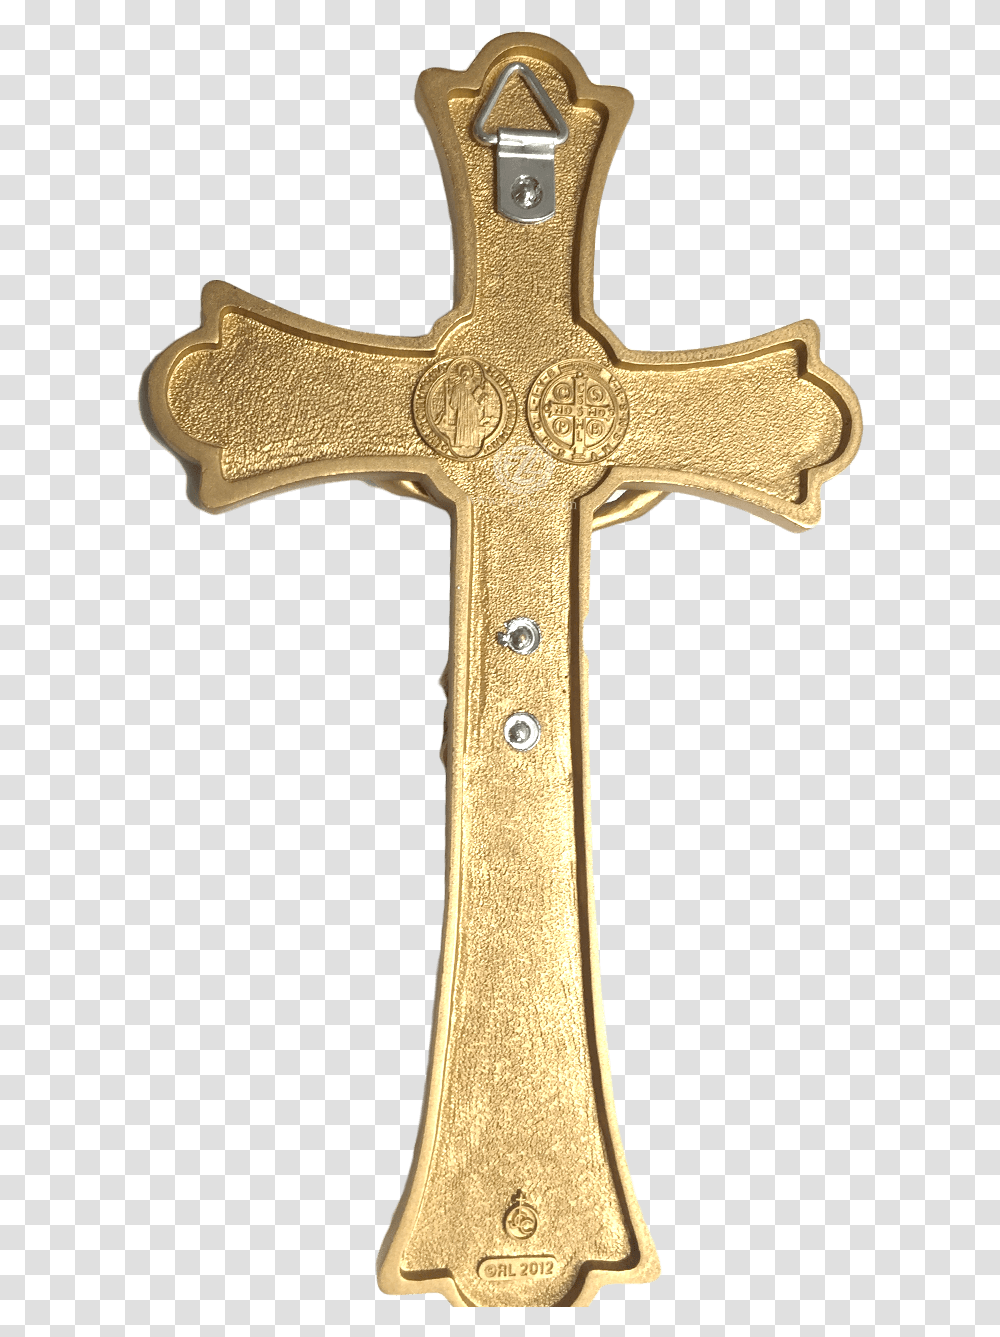 Holy Mass Wedding Crucifix Cross With Papal Blessing Cross Transparent Png